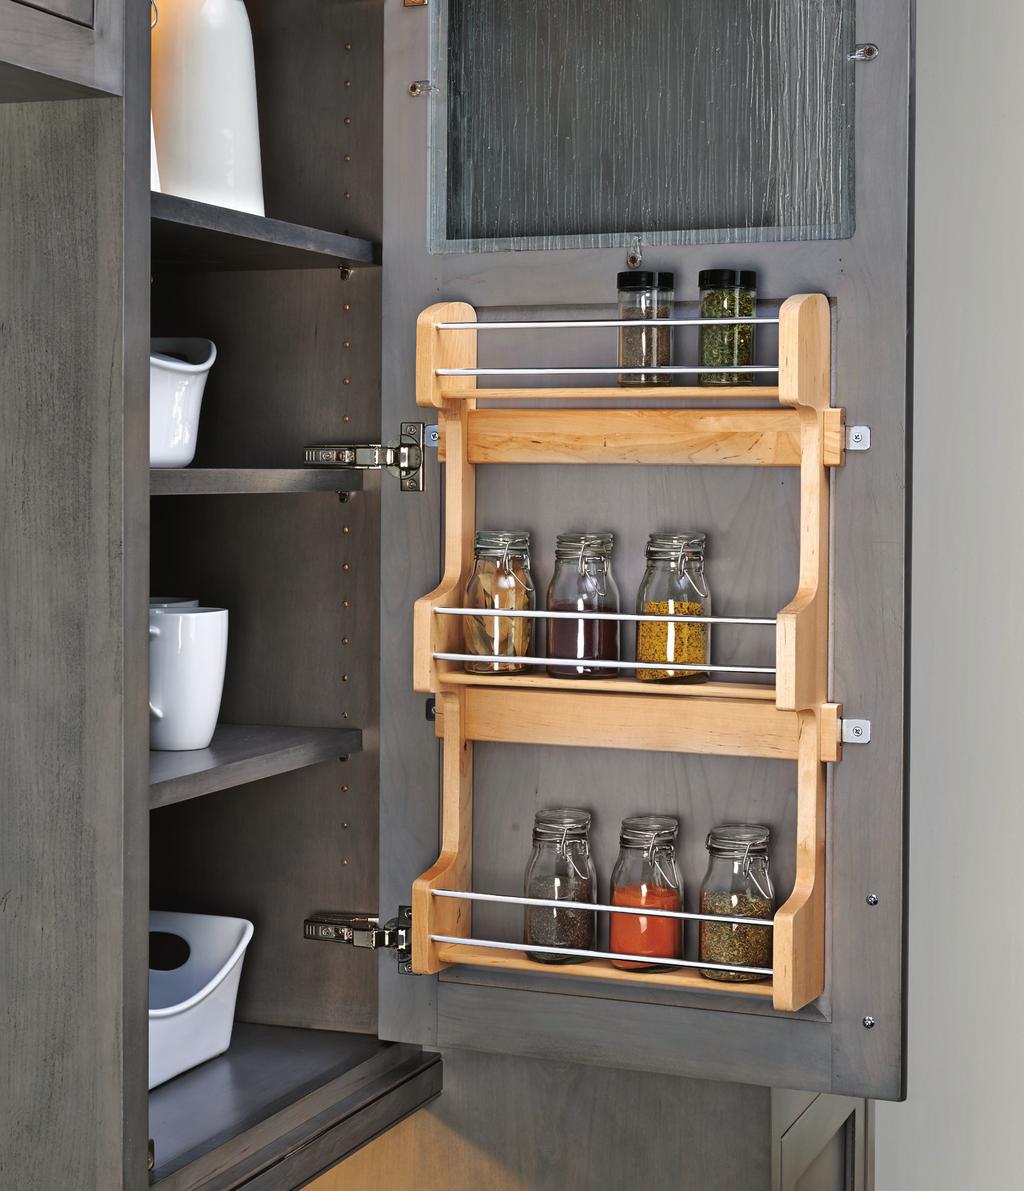 4SR SERIES DOOR MOUNT SPICE RACK Design for 5", 8" and 2" wall cabinets Can house spice bottles up to 2-4" diameter construction with semi-gloss finish 4-screw installation Adjustable mounting